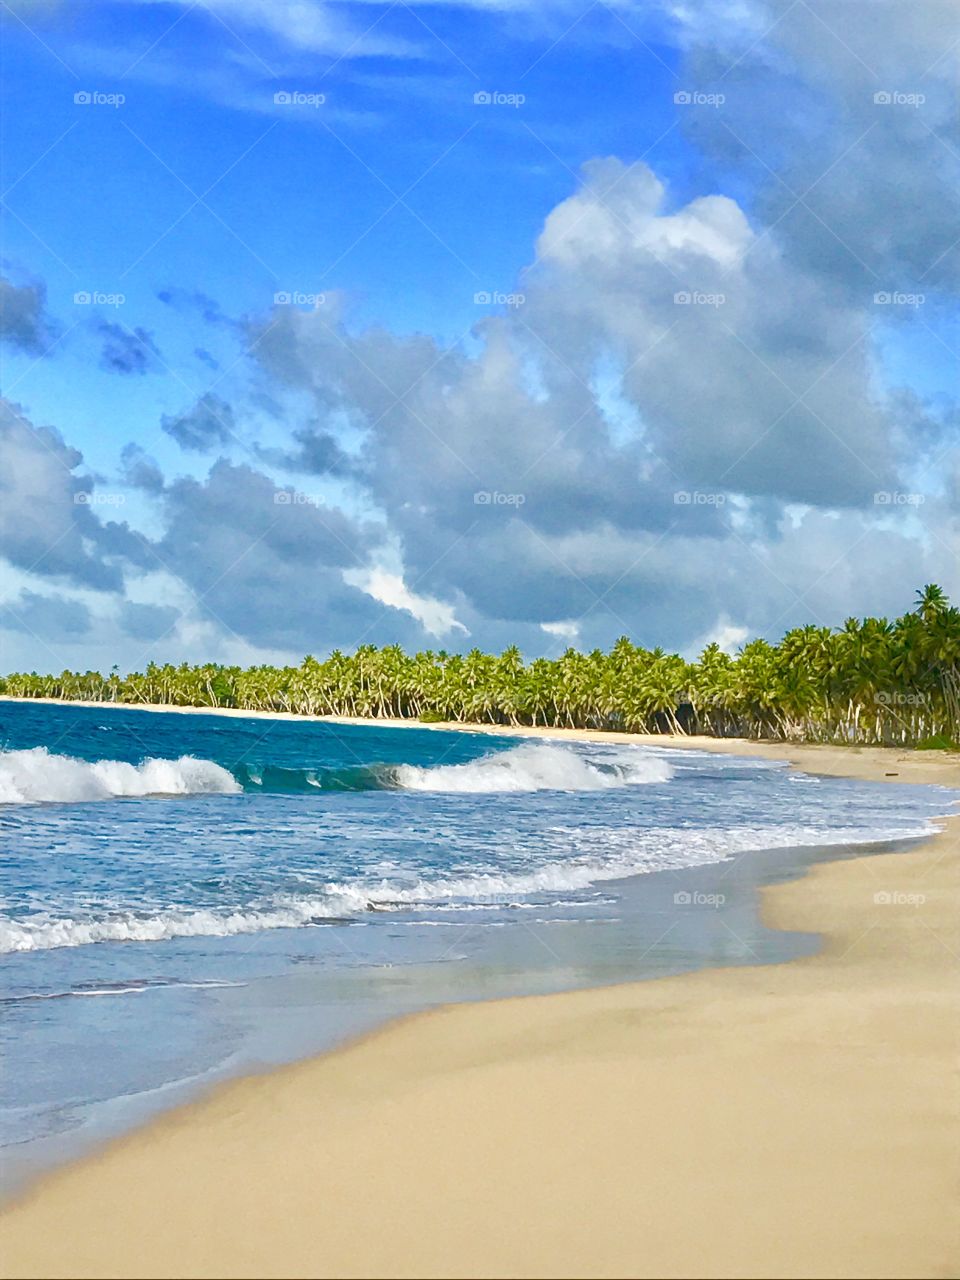 deserted beach in the Dominican Republic, beautiful late afternoon in mid summer, catching waves and a perfect tropical forest 